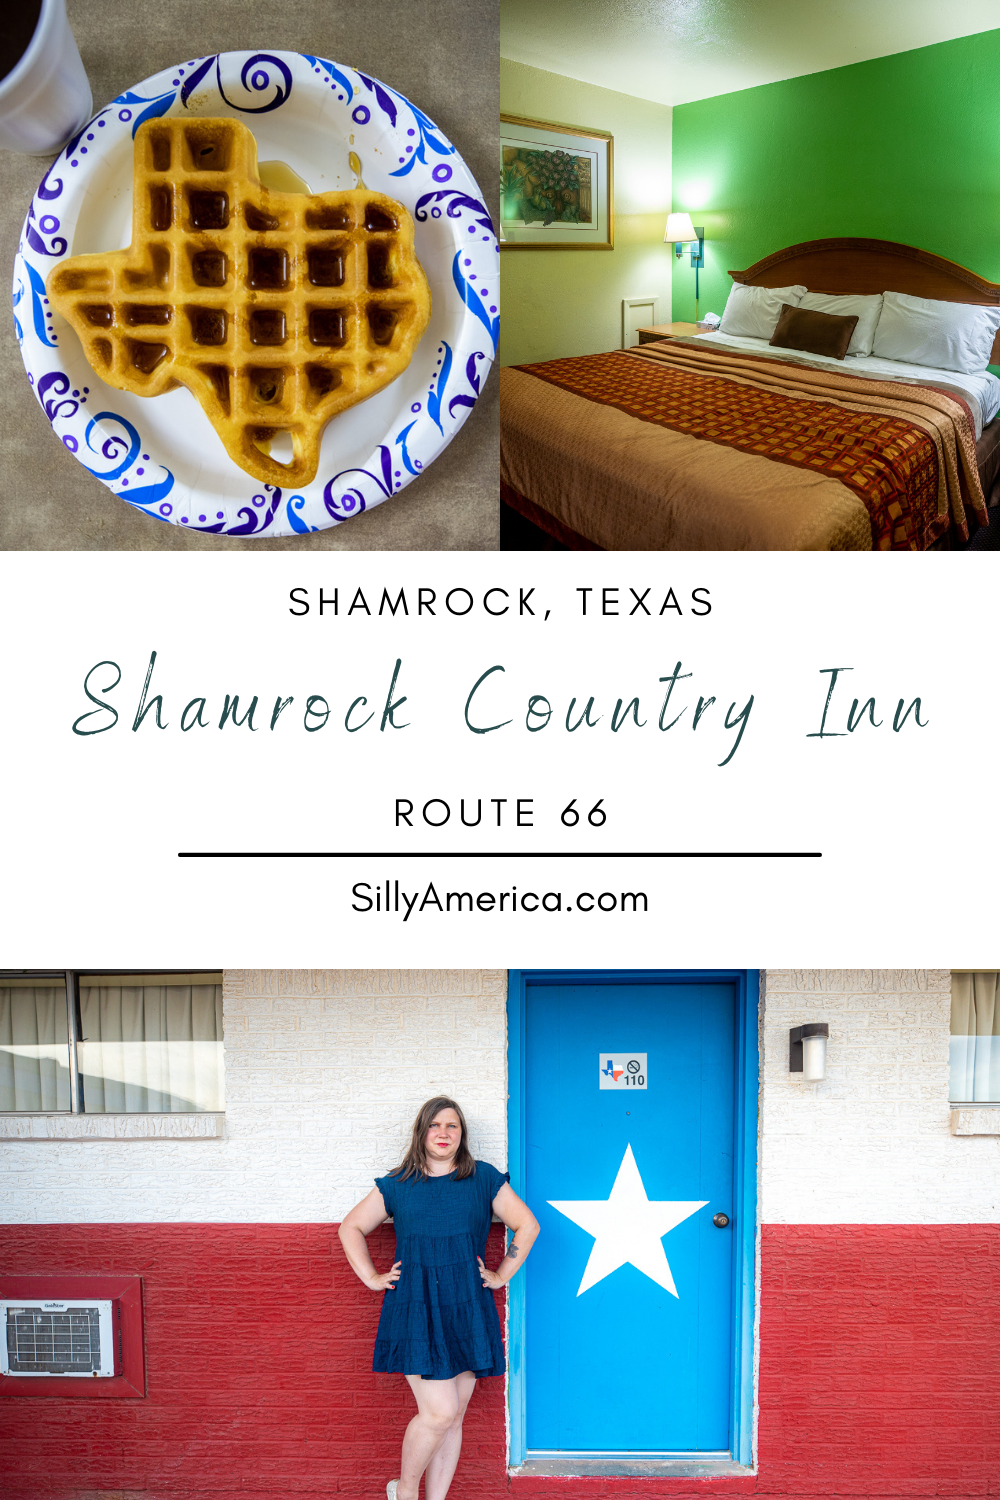 The Shamrock Country Inn motel is a classic roadside motel in a classic Route 66 town.  The hotel opened in September 1959 as the Shamrock Ranger Motel. Stay at this hotel overnight on your Route 66 road trip and be sure to get a Texas shaped waffle for breakfast.   #RoadTrips #RoadTripStop #Route66 #Route66RoadTrip #TexasRoute66 #Texas #TexasRoadTrip #TexasRoadsideAttractions #RoadsideAttractions #RoadsideAttraction #RoadsideAmerica #RoadTrip 